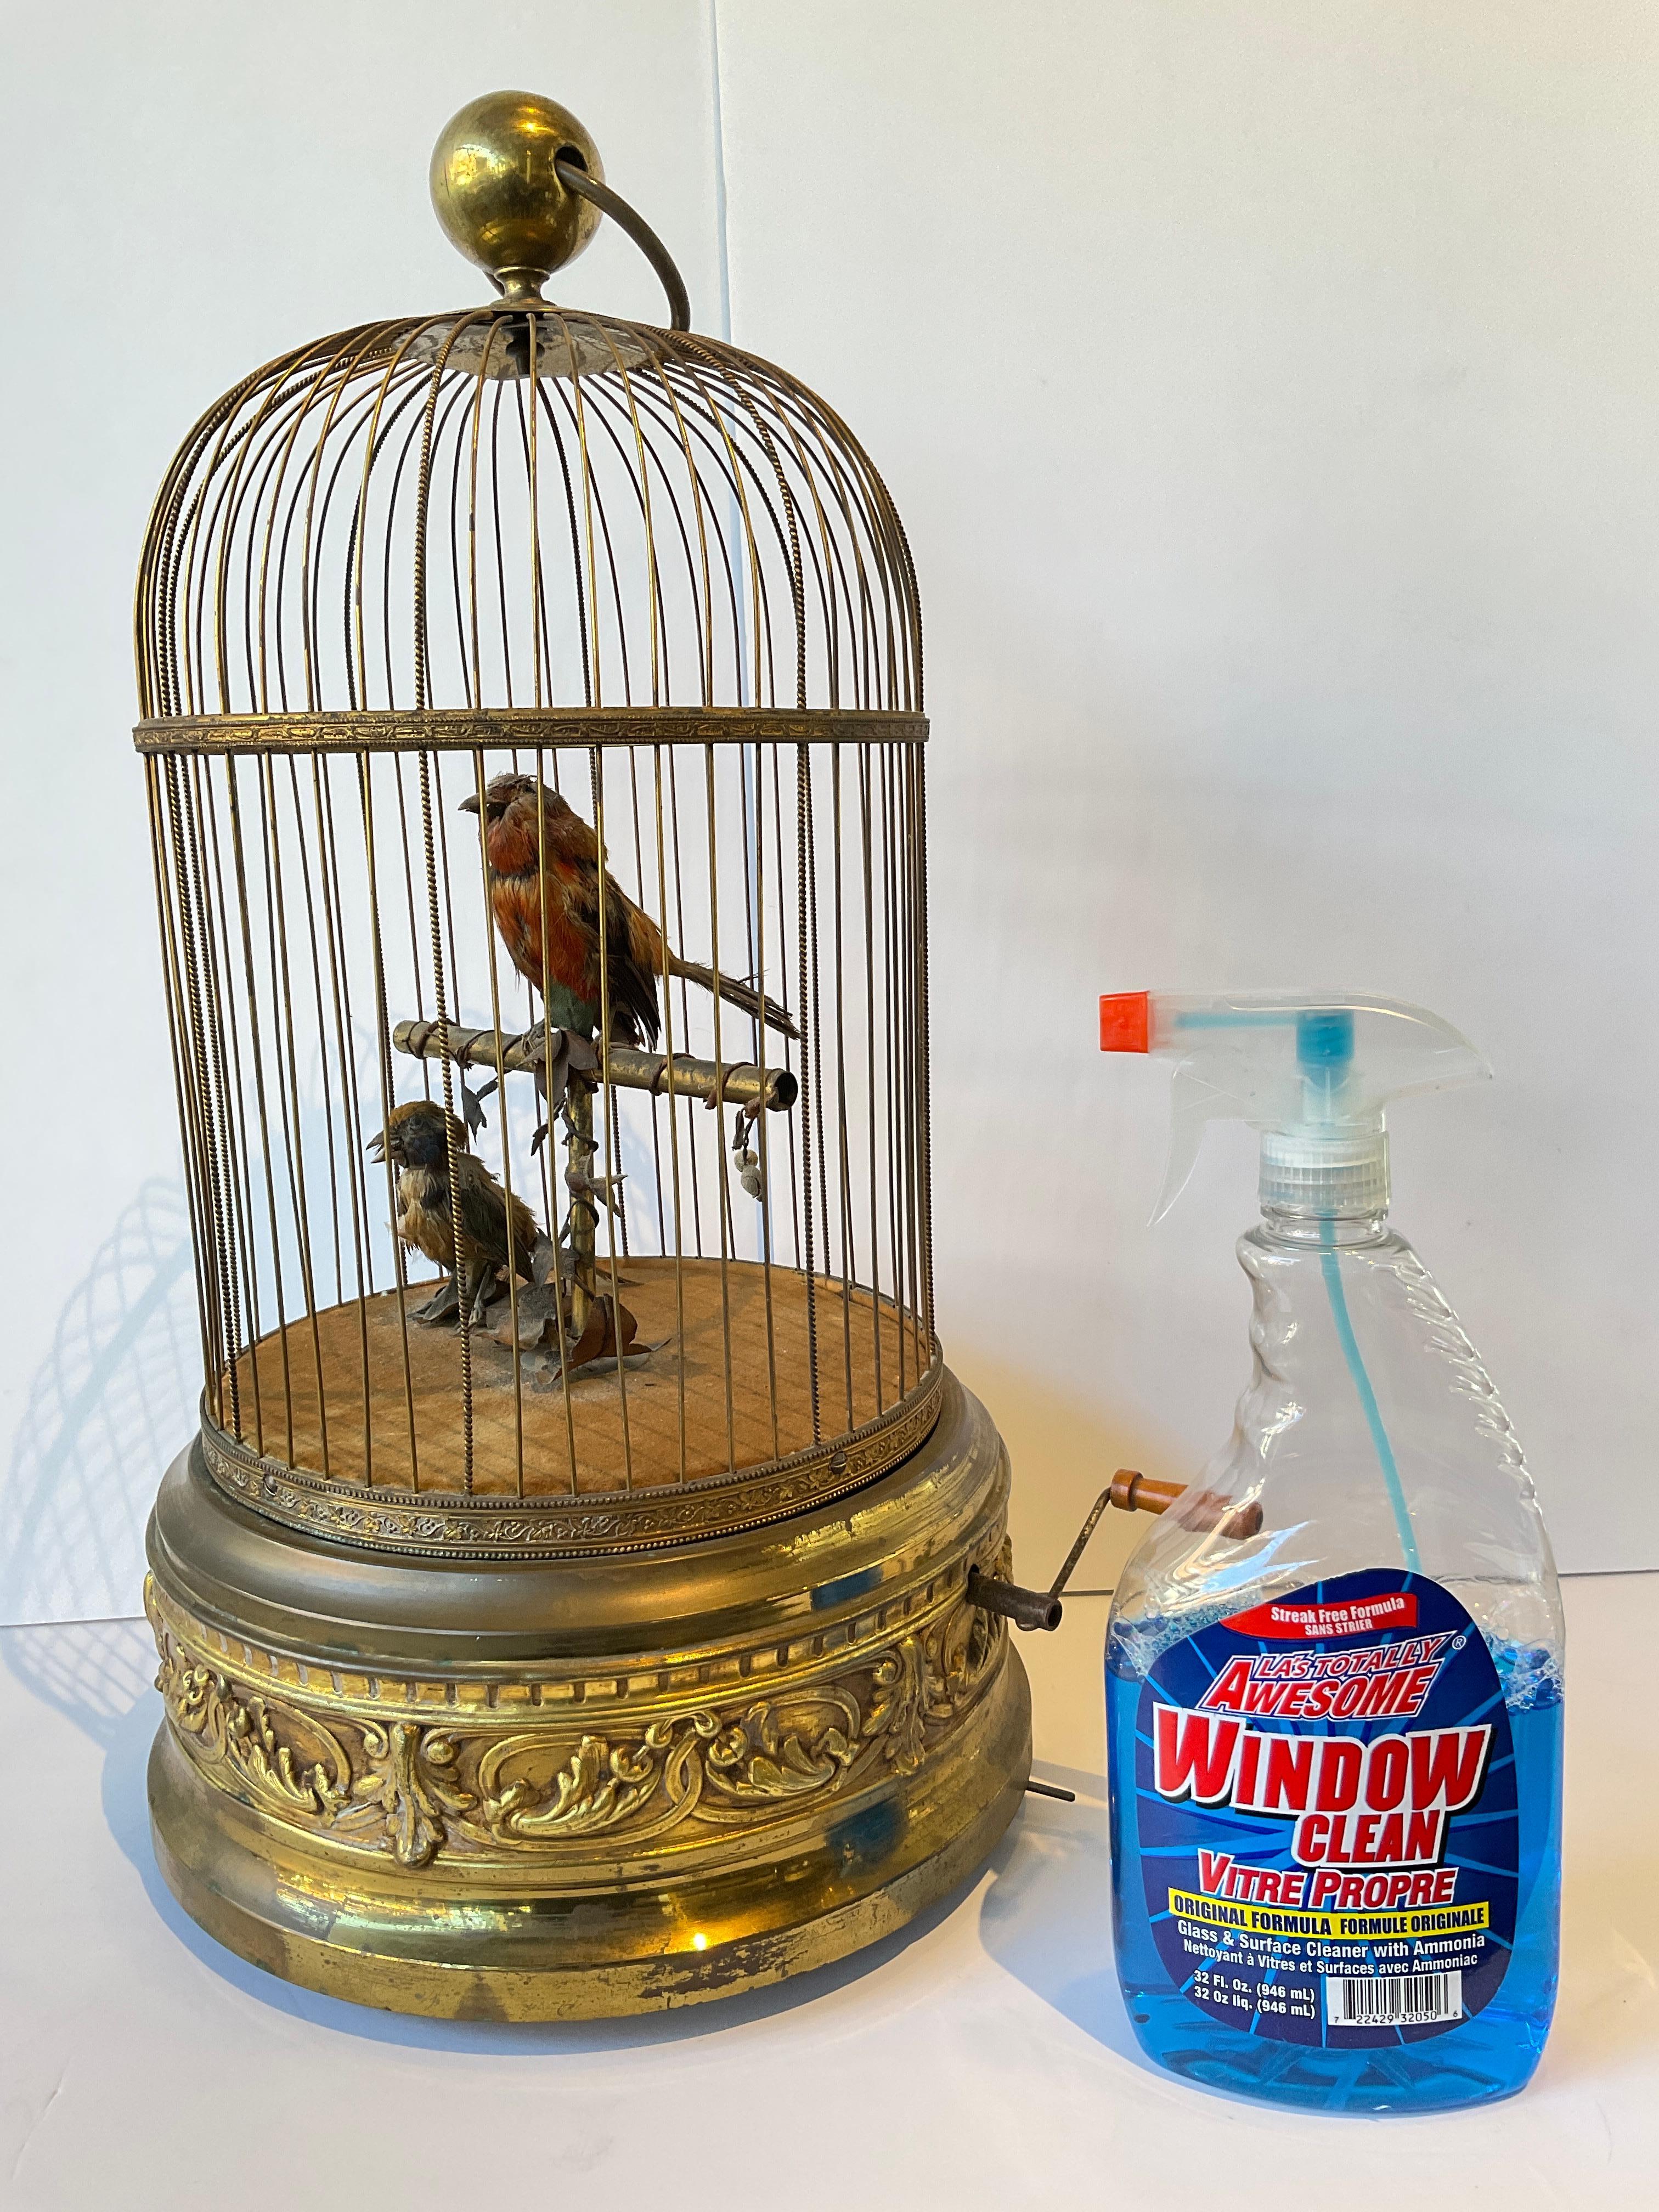 1915 French automaton birds singing and tweeting in a brass birdcage. Marked made in France on the bottom.
This item cannot be shipped through parcel mail. It should be sent through a shipper.
The videos sound is off and not allowing the tweeting to